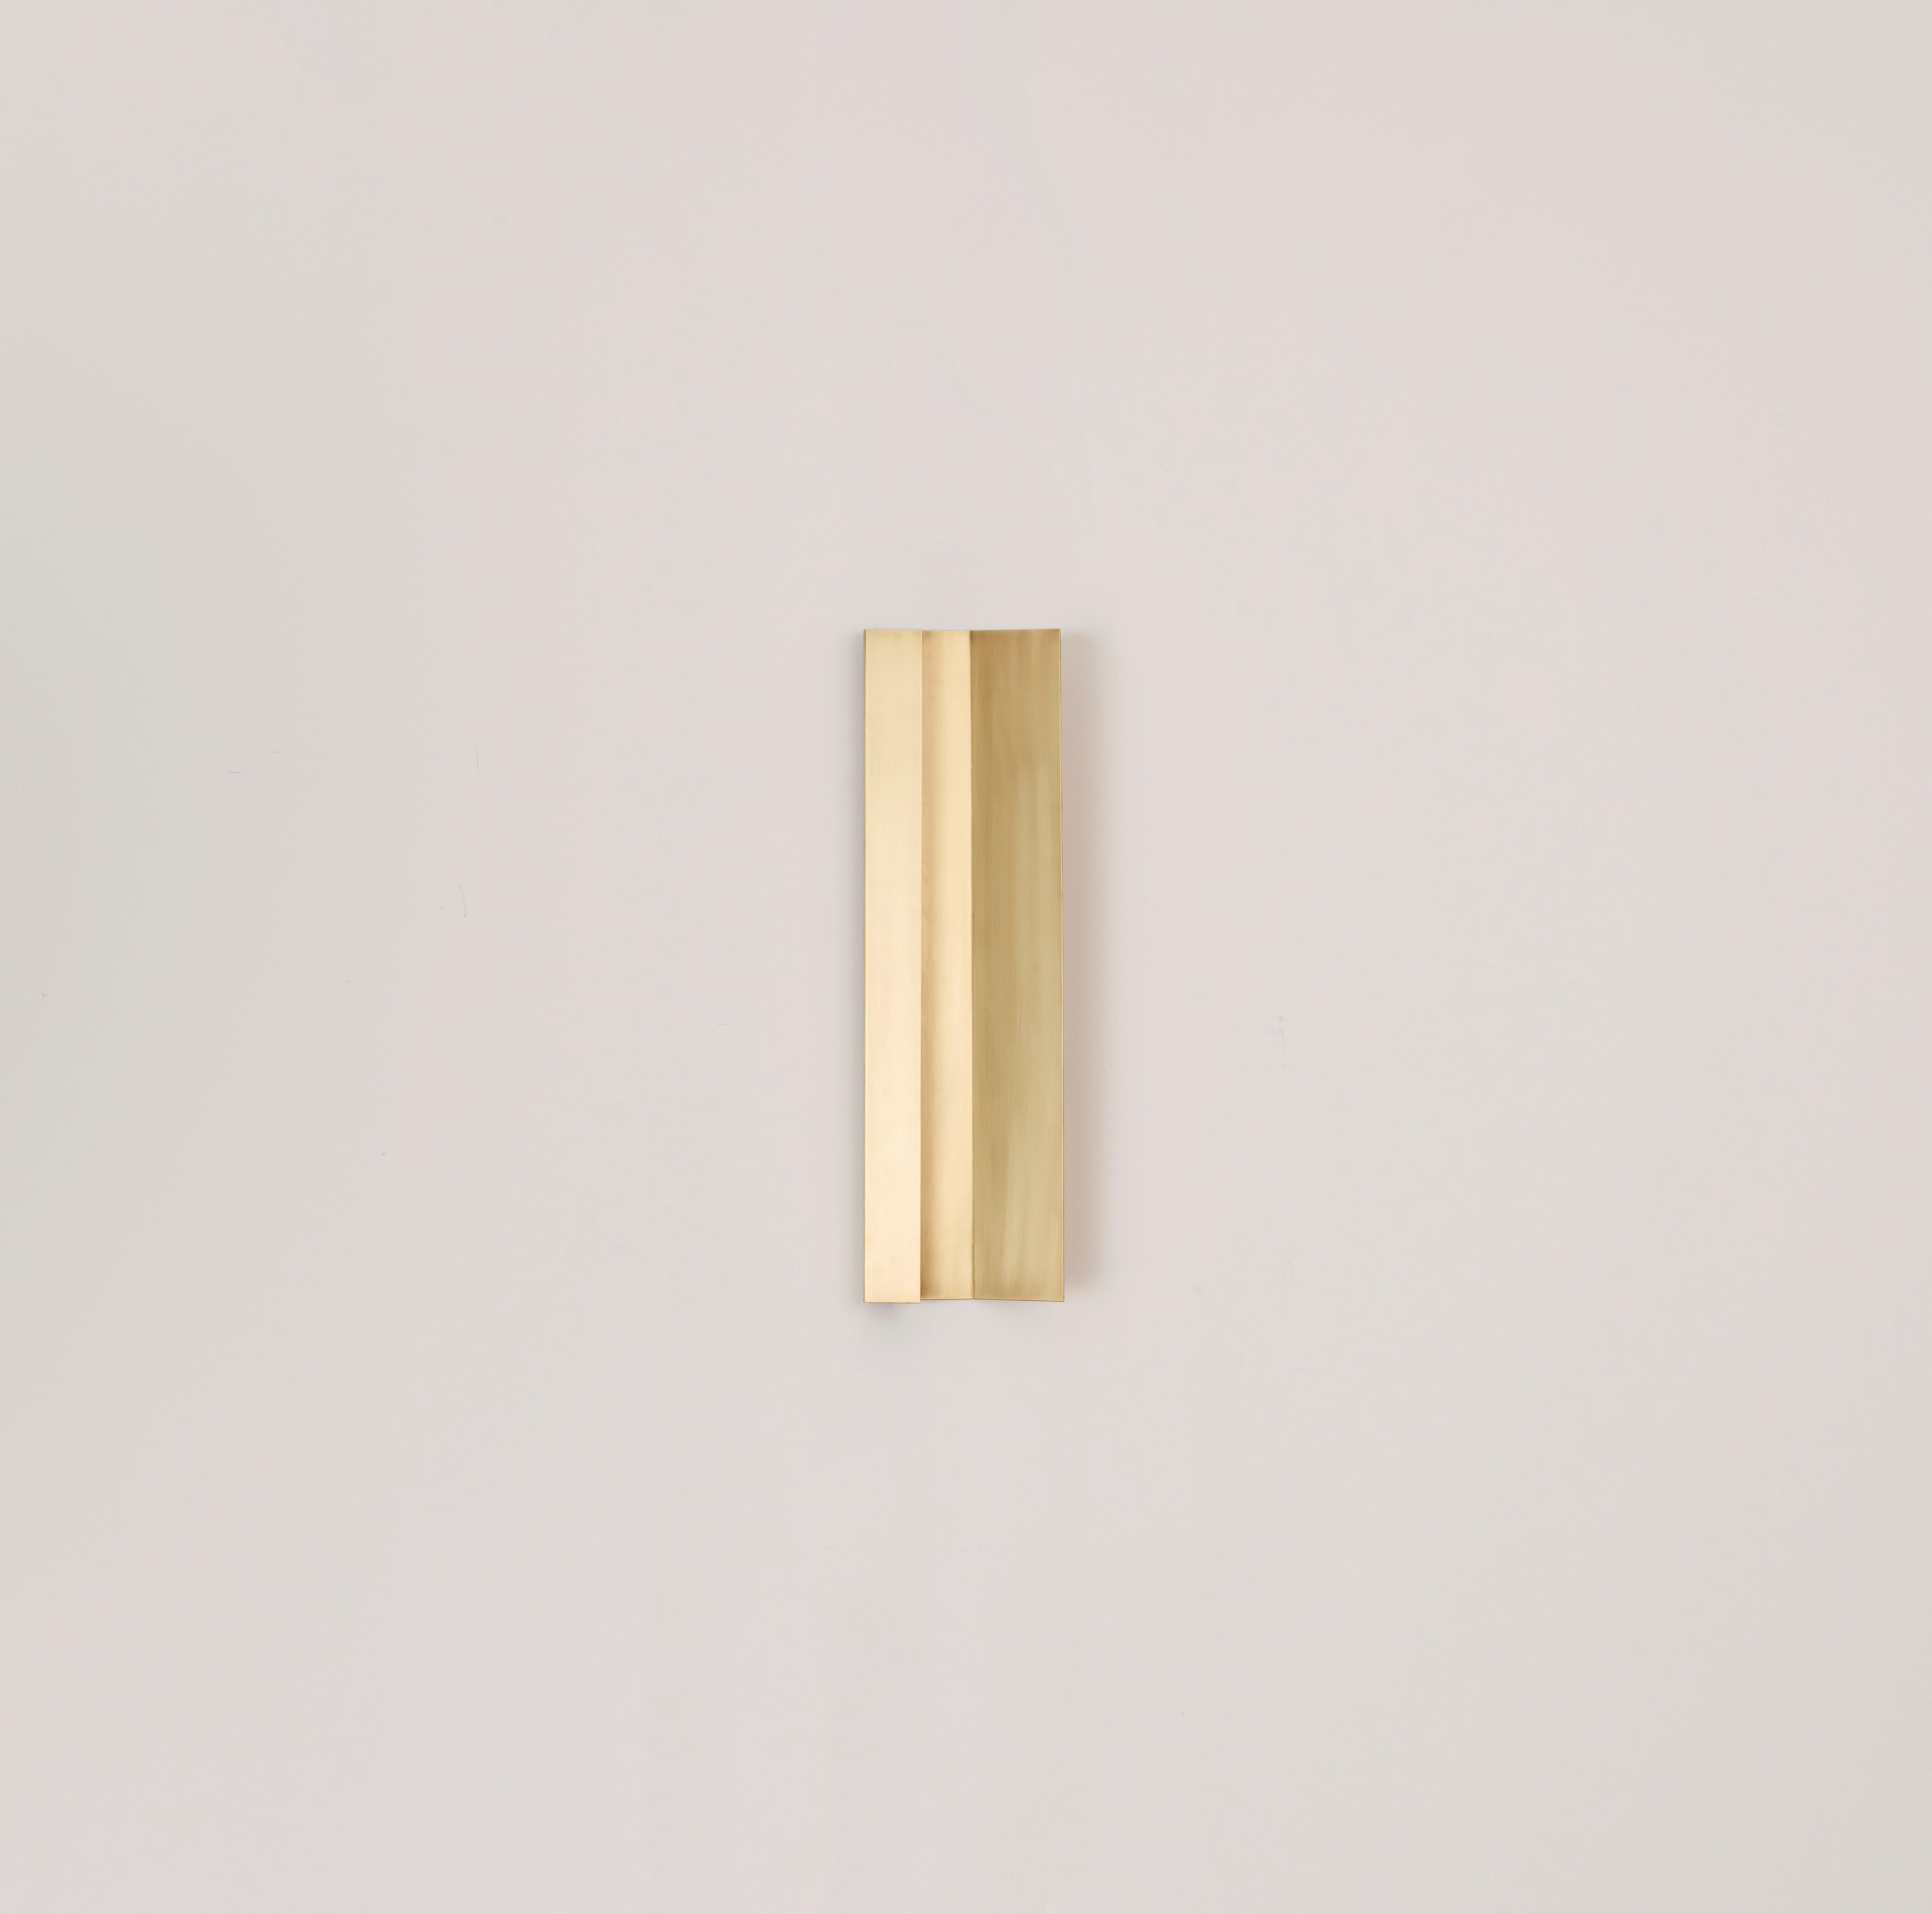 Mano small wall lamp mounted- vertical side lighter by Umberto Bellardi Ricci.
Dimensions: D 3